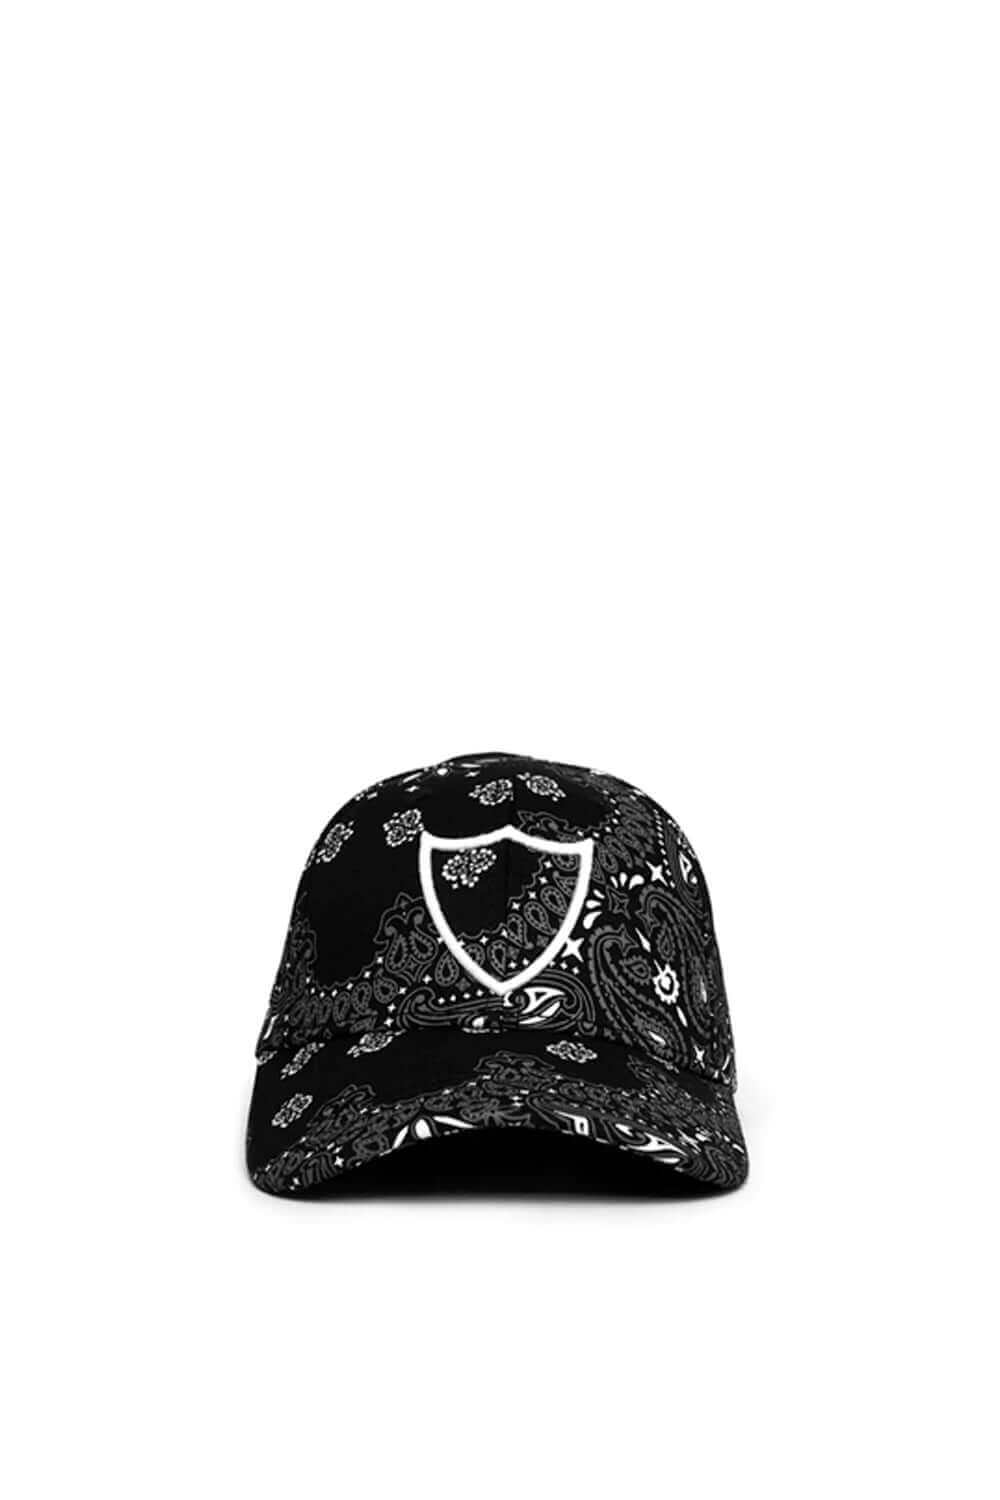 HTC BANDANA VISOR CAP Paisley baseball hat, HTC logo embroidered on the front. One Size. 100% Cotton. HTC LOS ANGELES